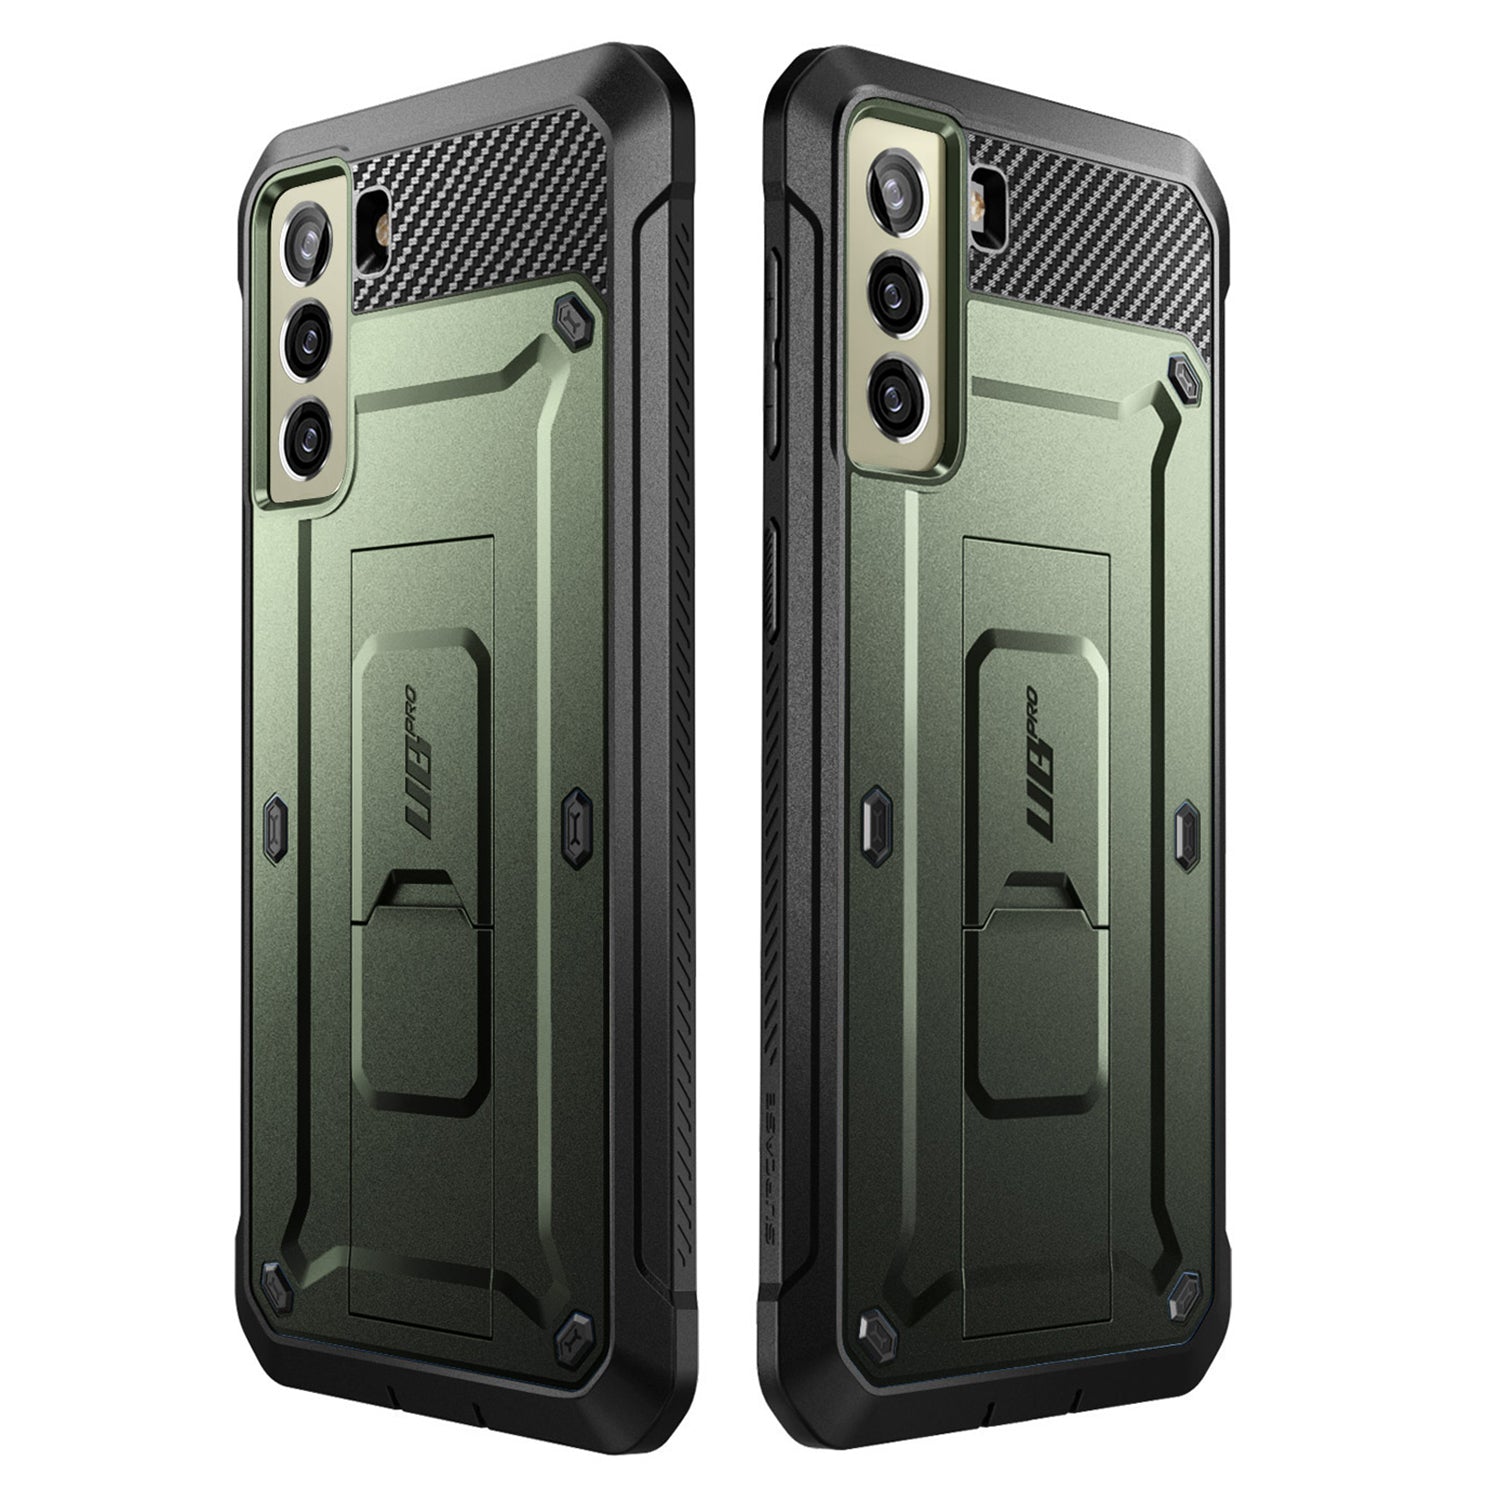 Supcase Unicorn Beetle Pro Series Full-Body Rugged Holster Case for Samsung Galaxy S21 FE(With built-in Screen Protector) Default Supcase 